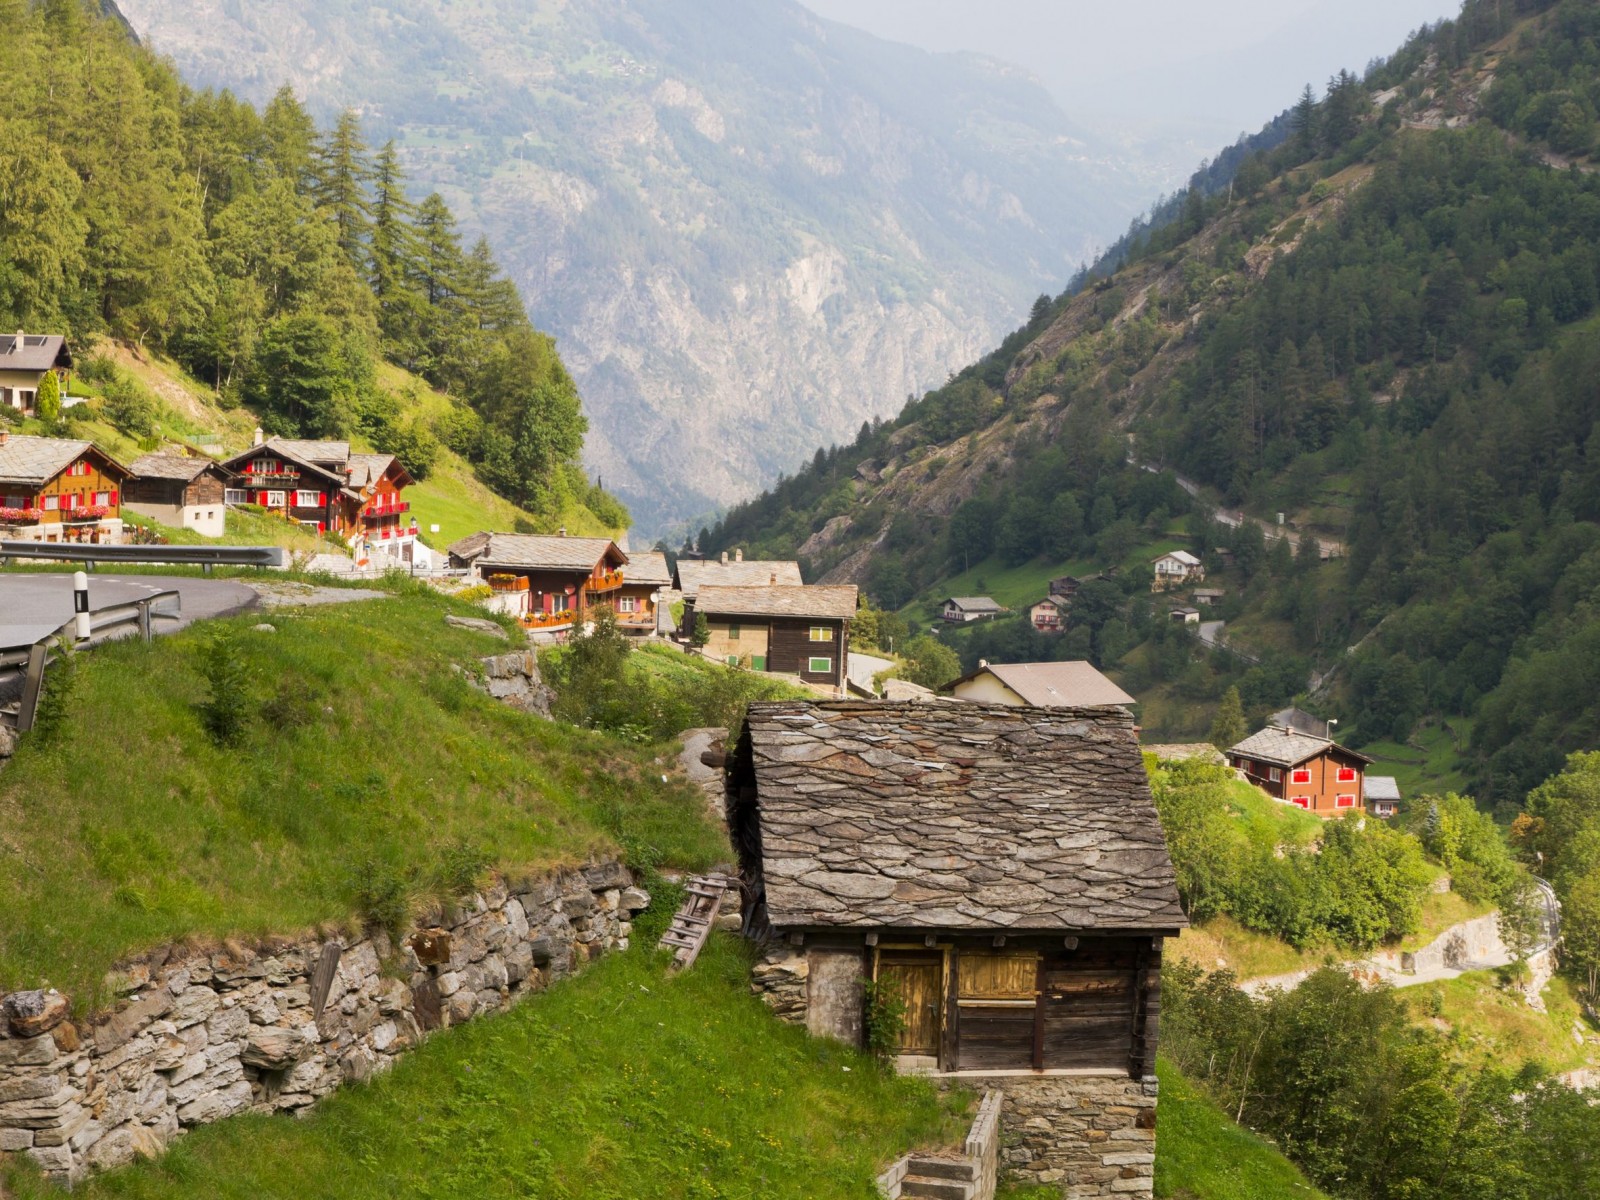 Travel-To-Switzerland-Small-Swiss-Village-Settlement-Saas-Balen-of-Wooden-Slate-Roof-Houses-in-Saas-Valley-Canton-Valais-Switzerland-1600x1200[1]